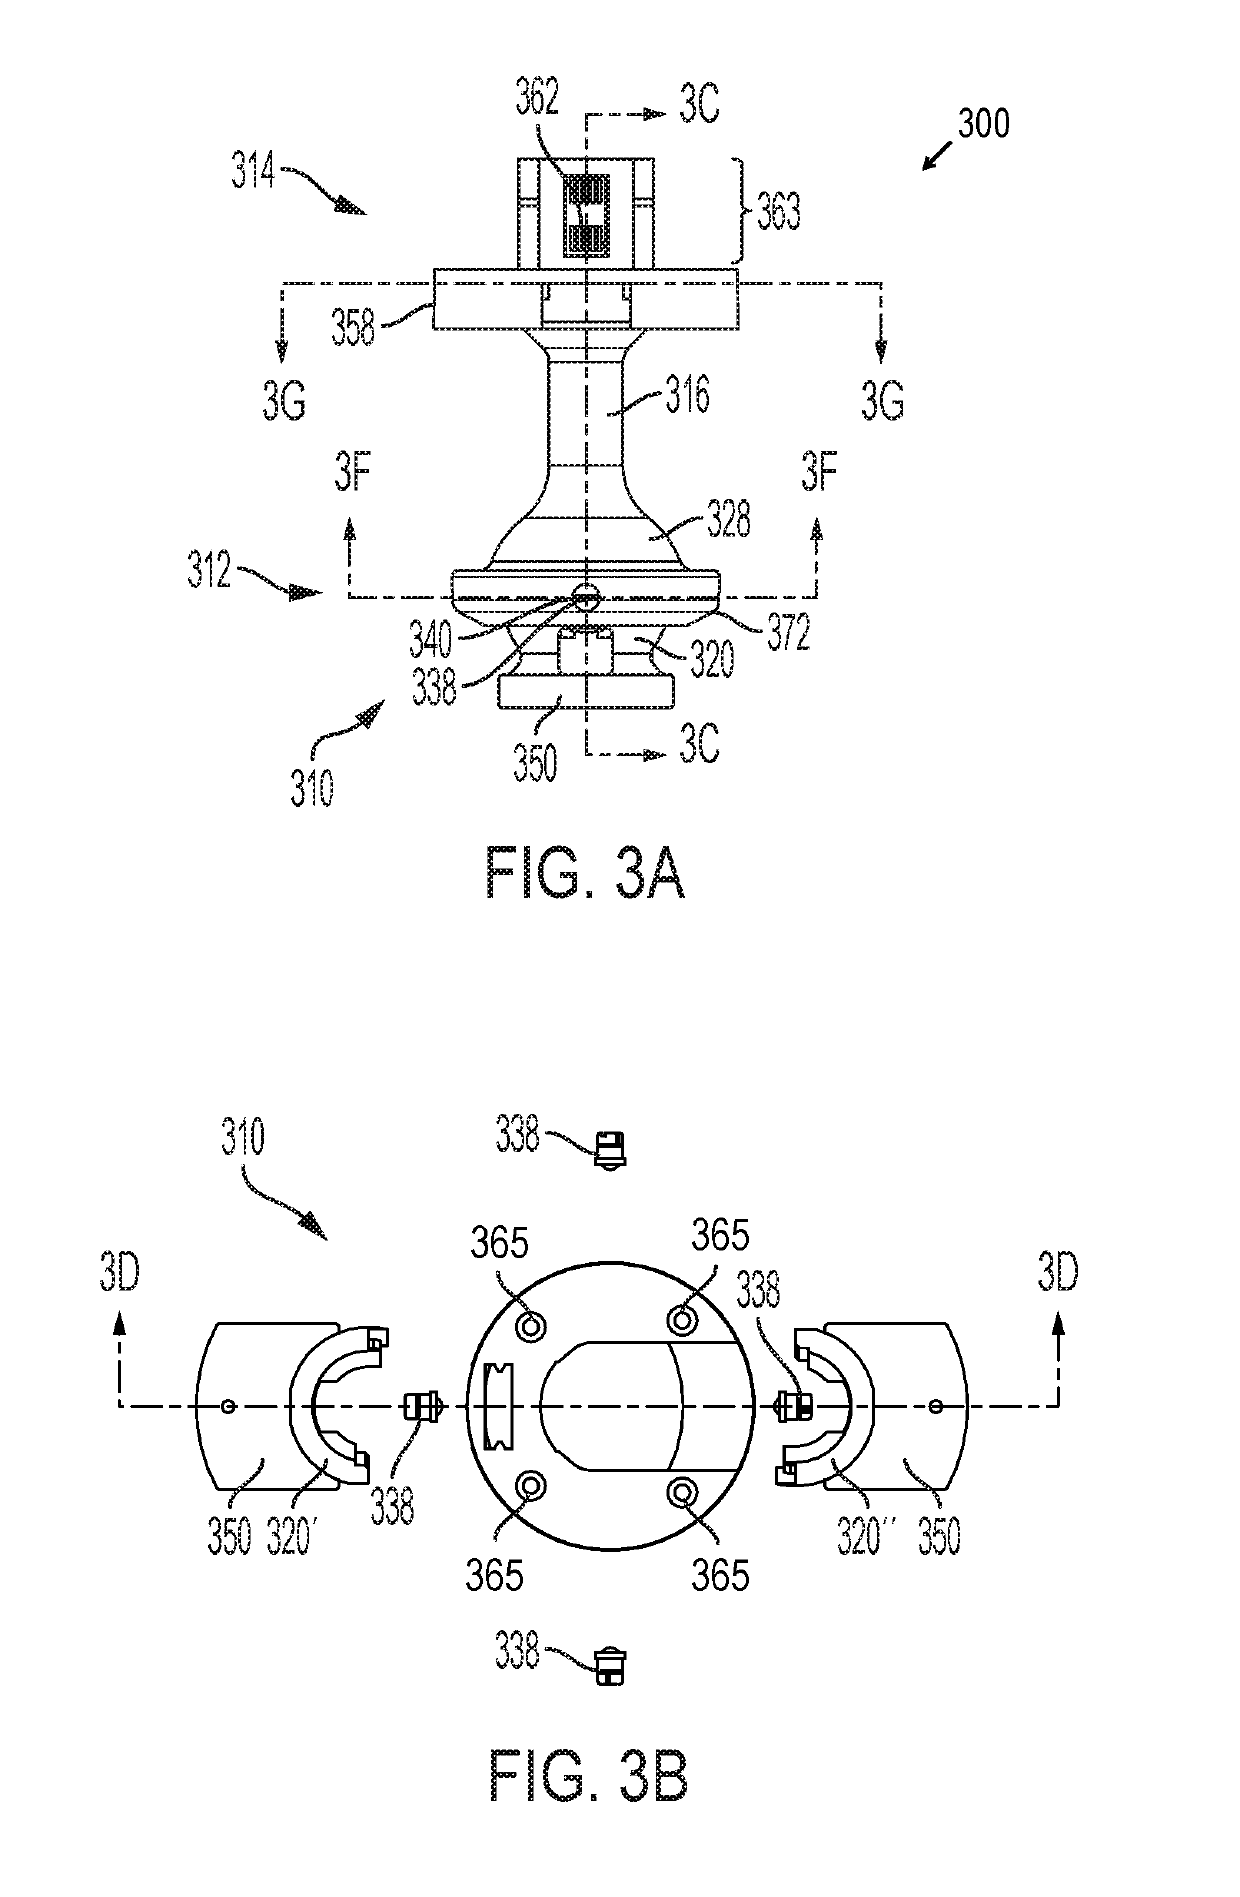 Multi-axis gimbal mounting for controller providing tactile feedback for the null command